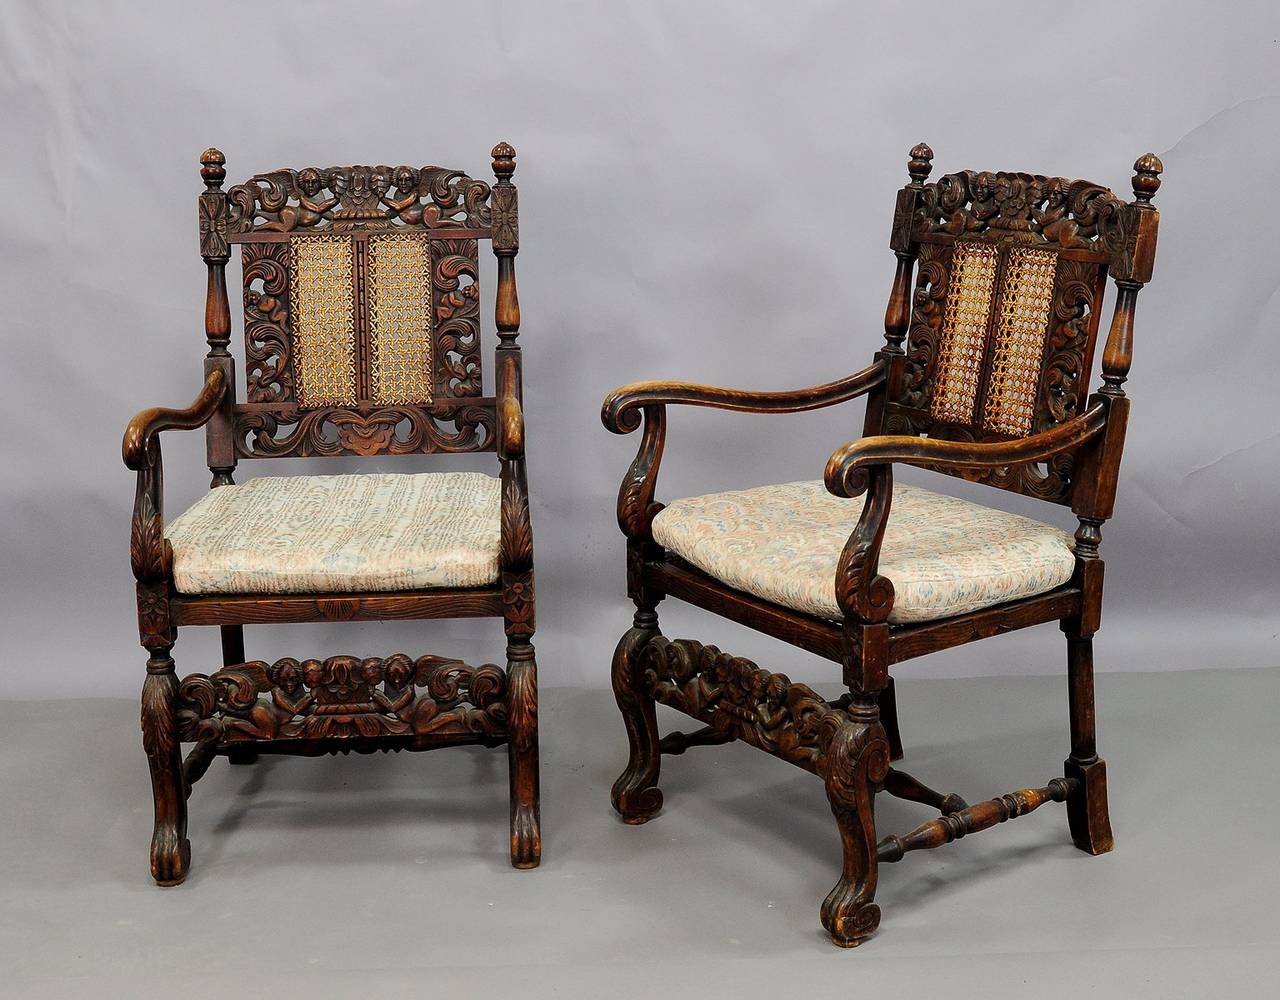 A pair of elaborately carved north german armchairs. base and backrest with carved cherubs, turned and carved legs and armrests.

shippig cost depend on the delivery address and the selected service. please contact us for a detailed shipping quote.